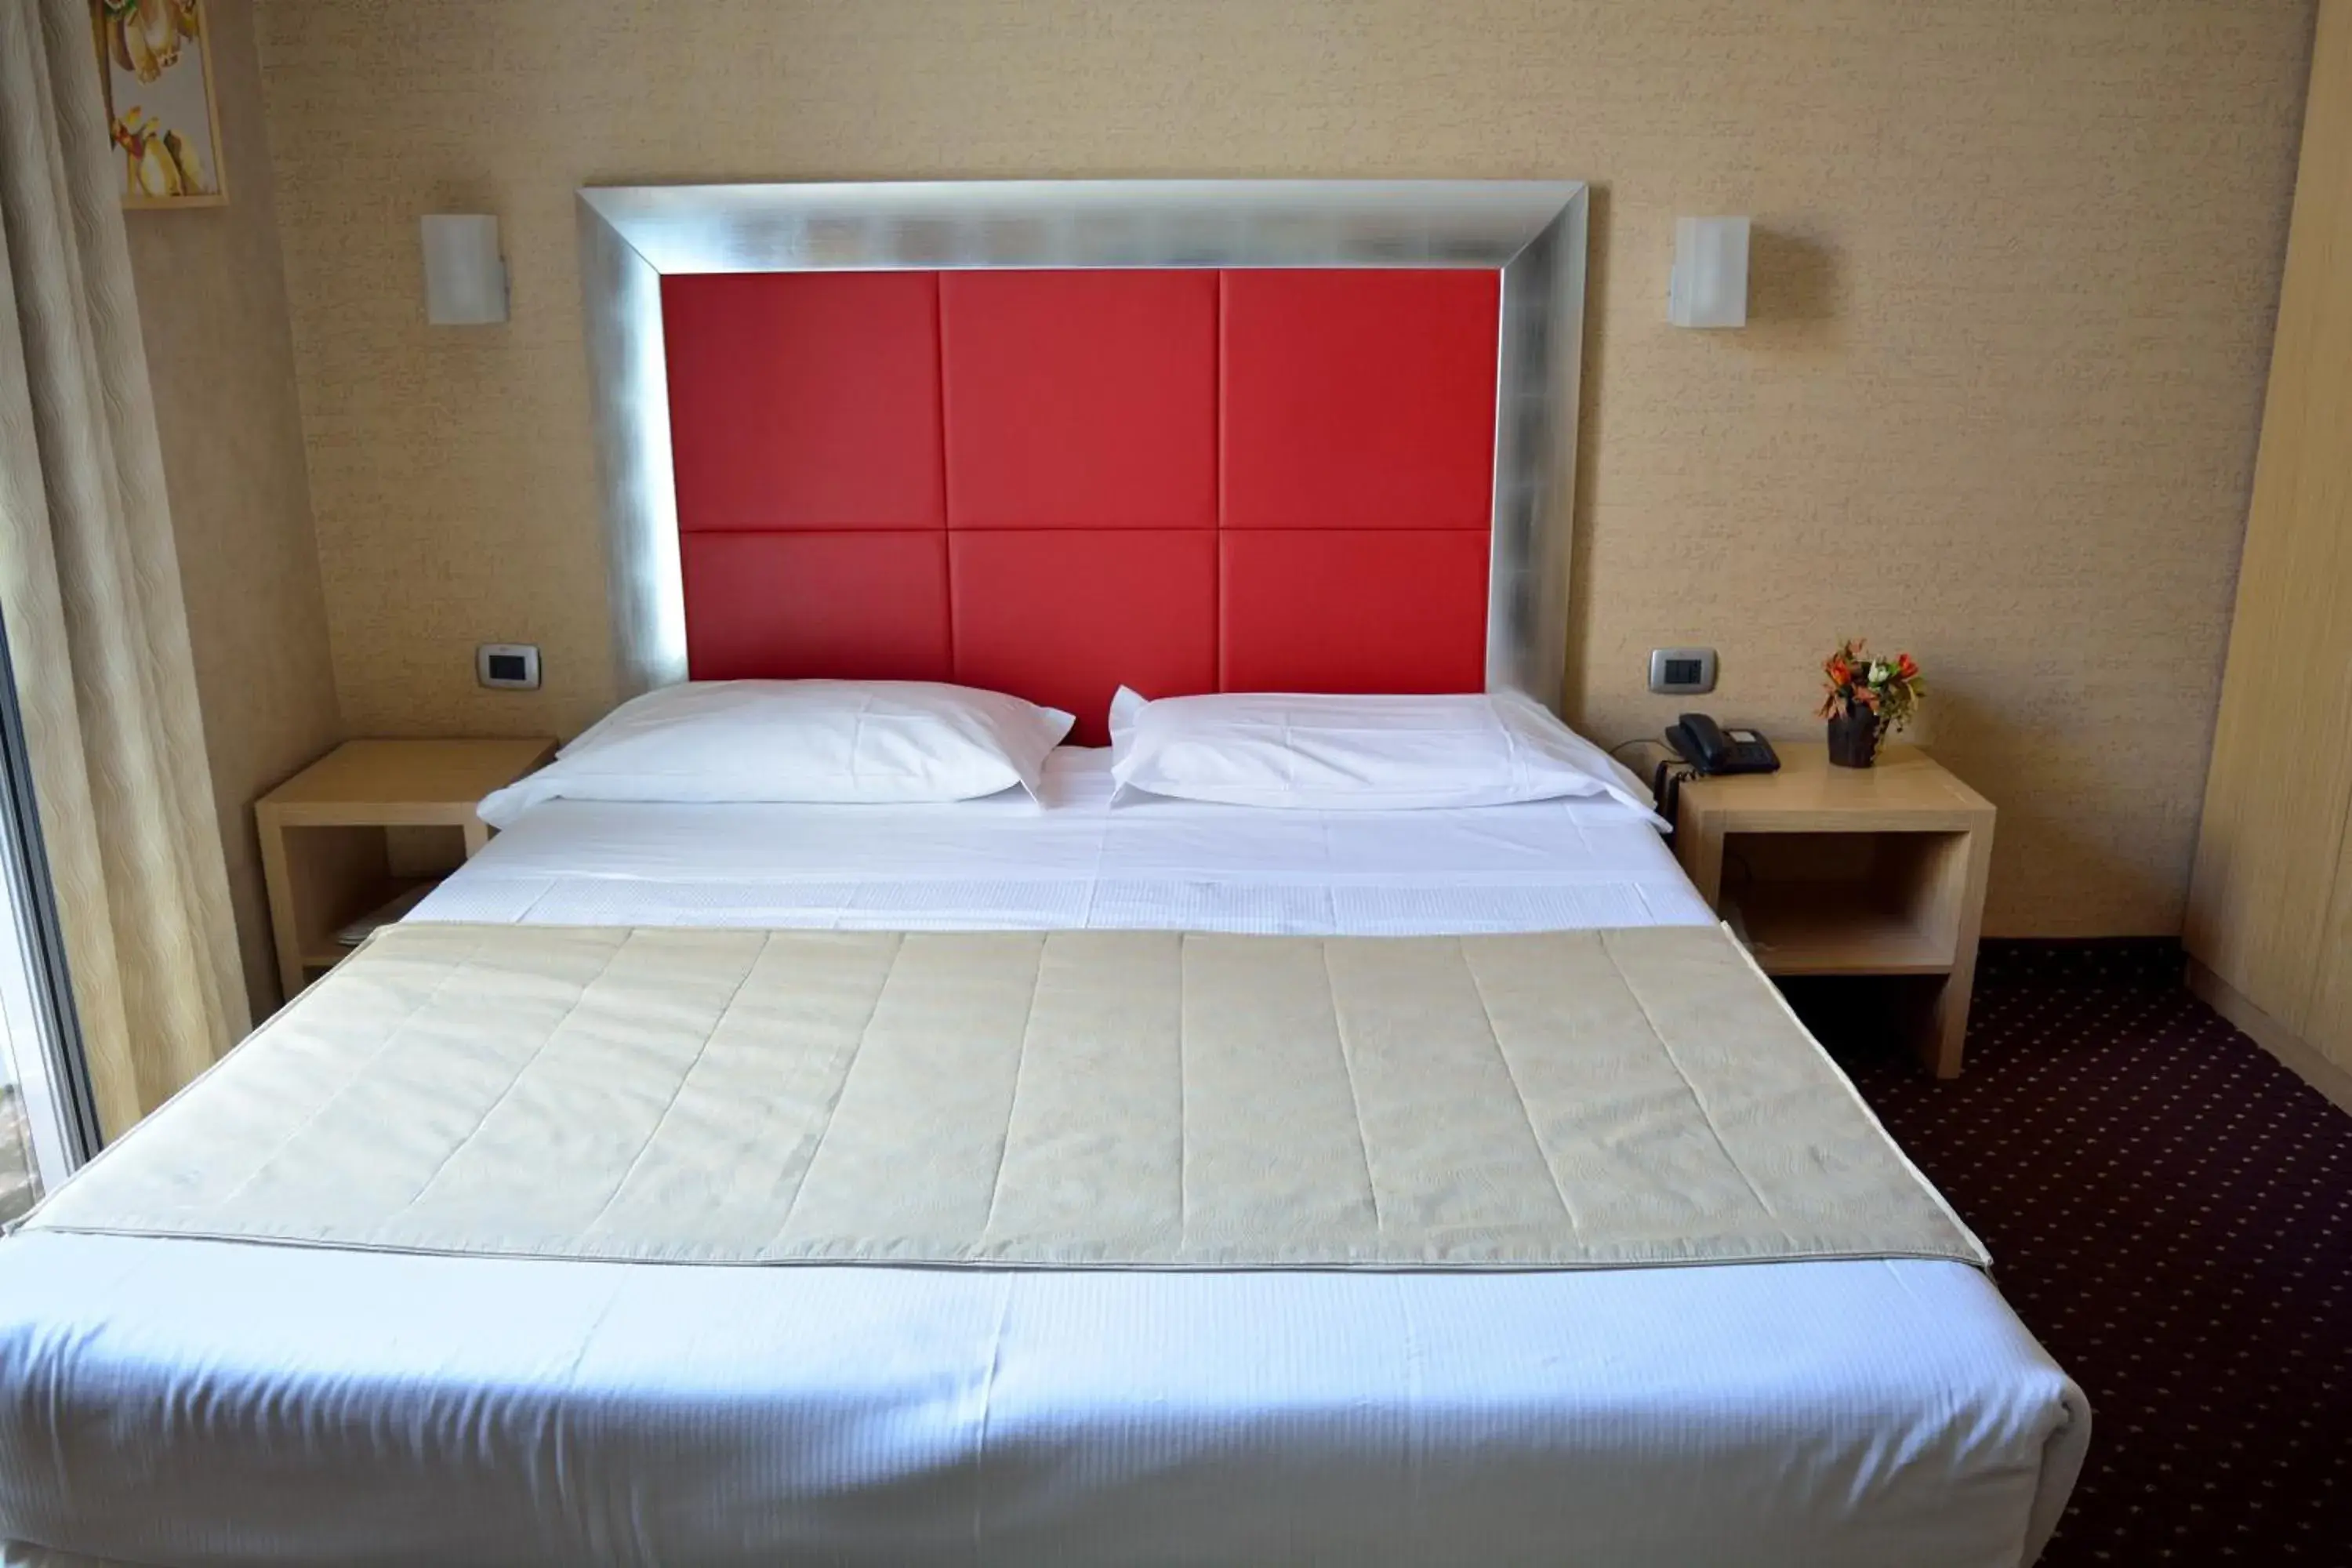 Bed, Room Photo in Hotel Susa